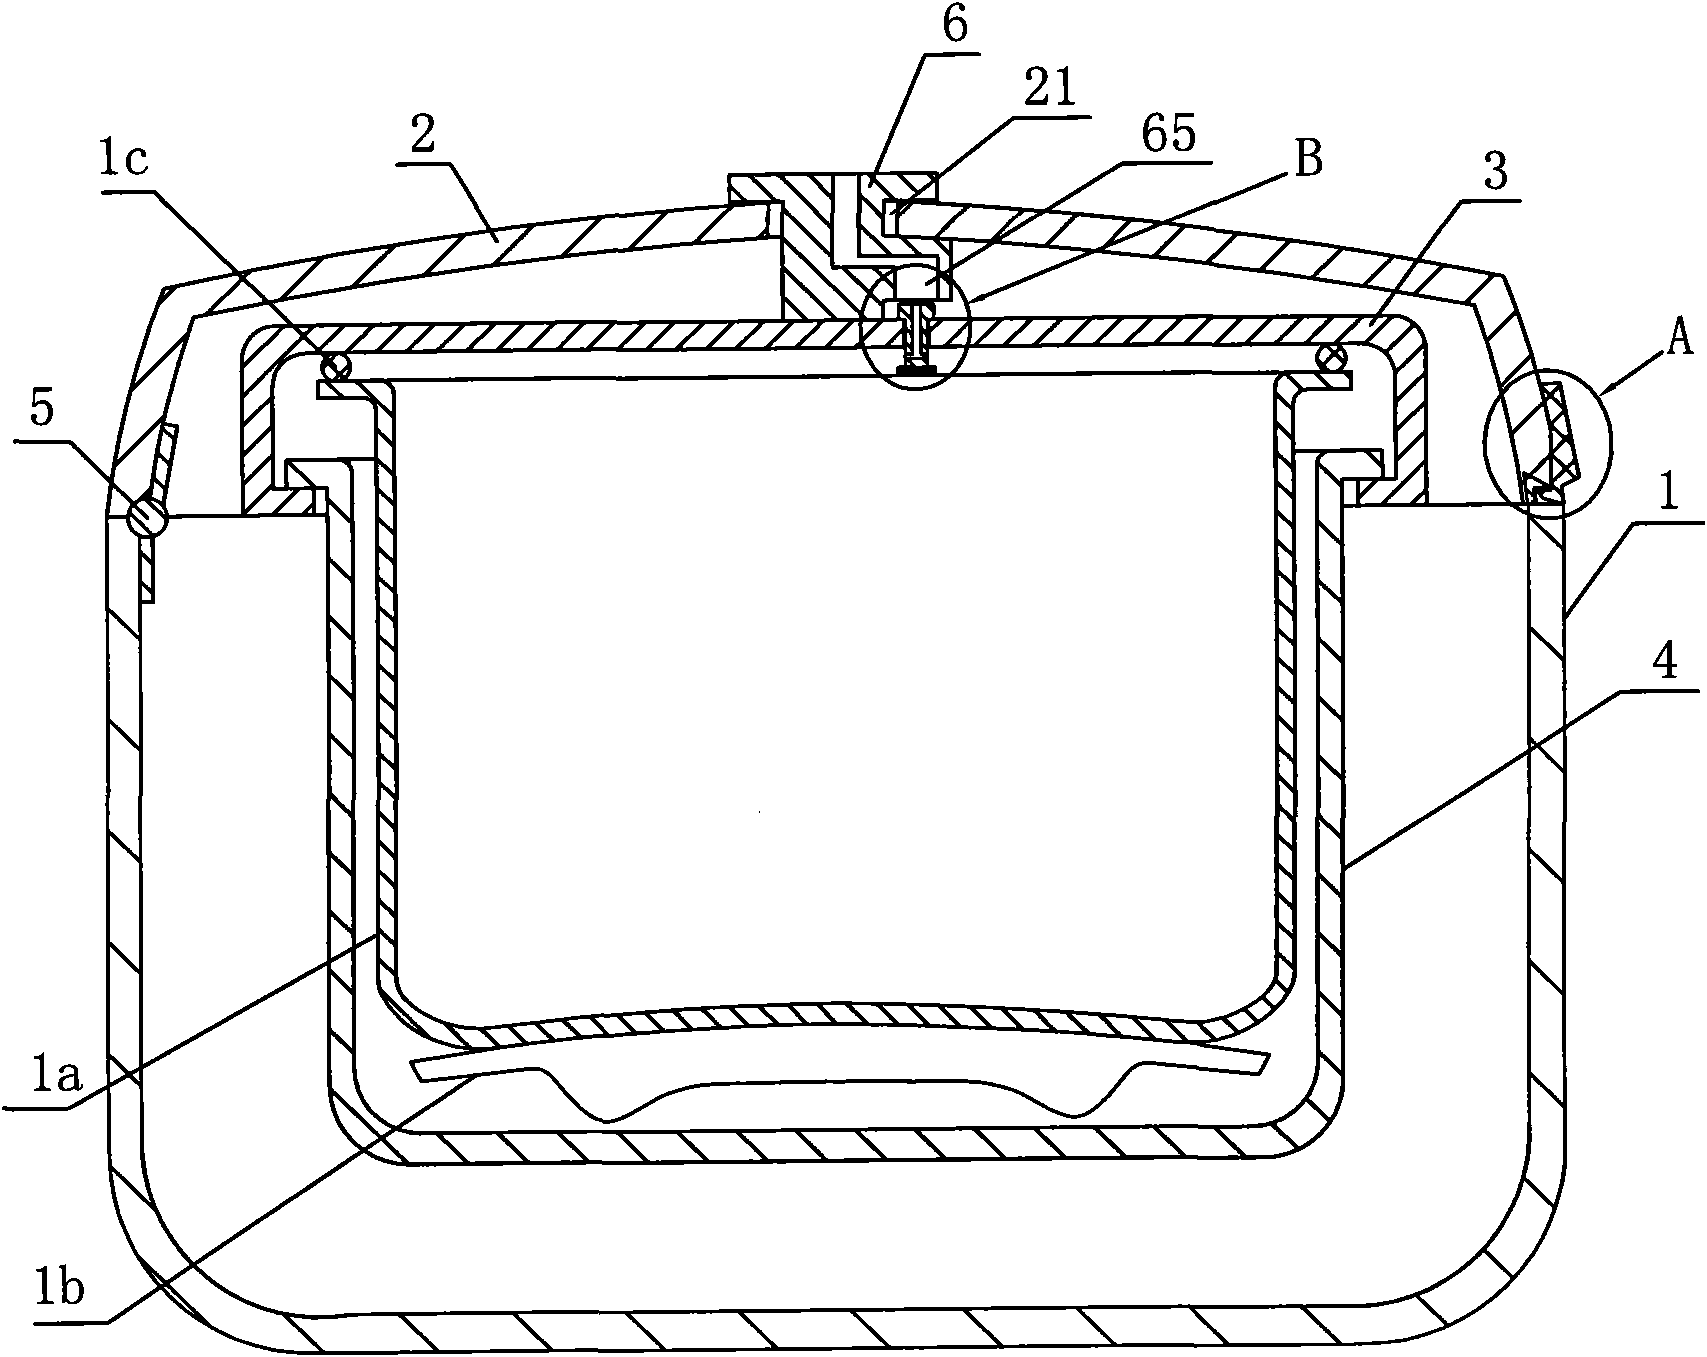 Cover structure of electric pressure cooker